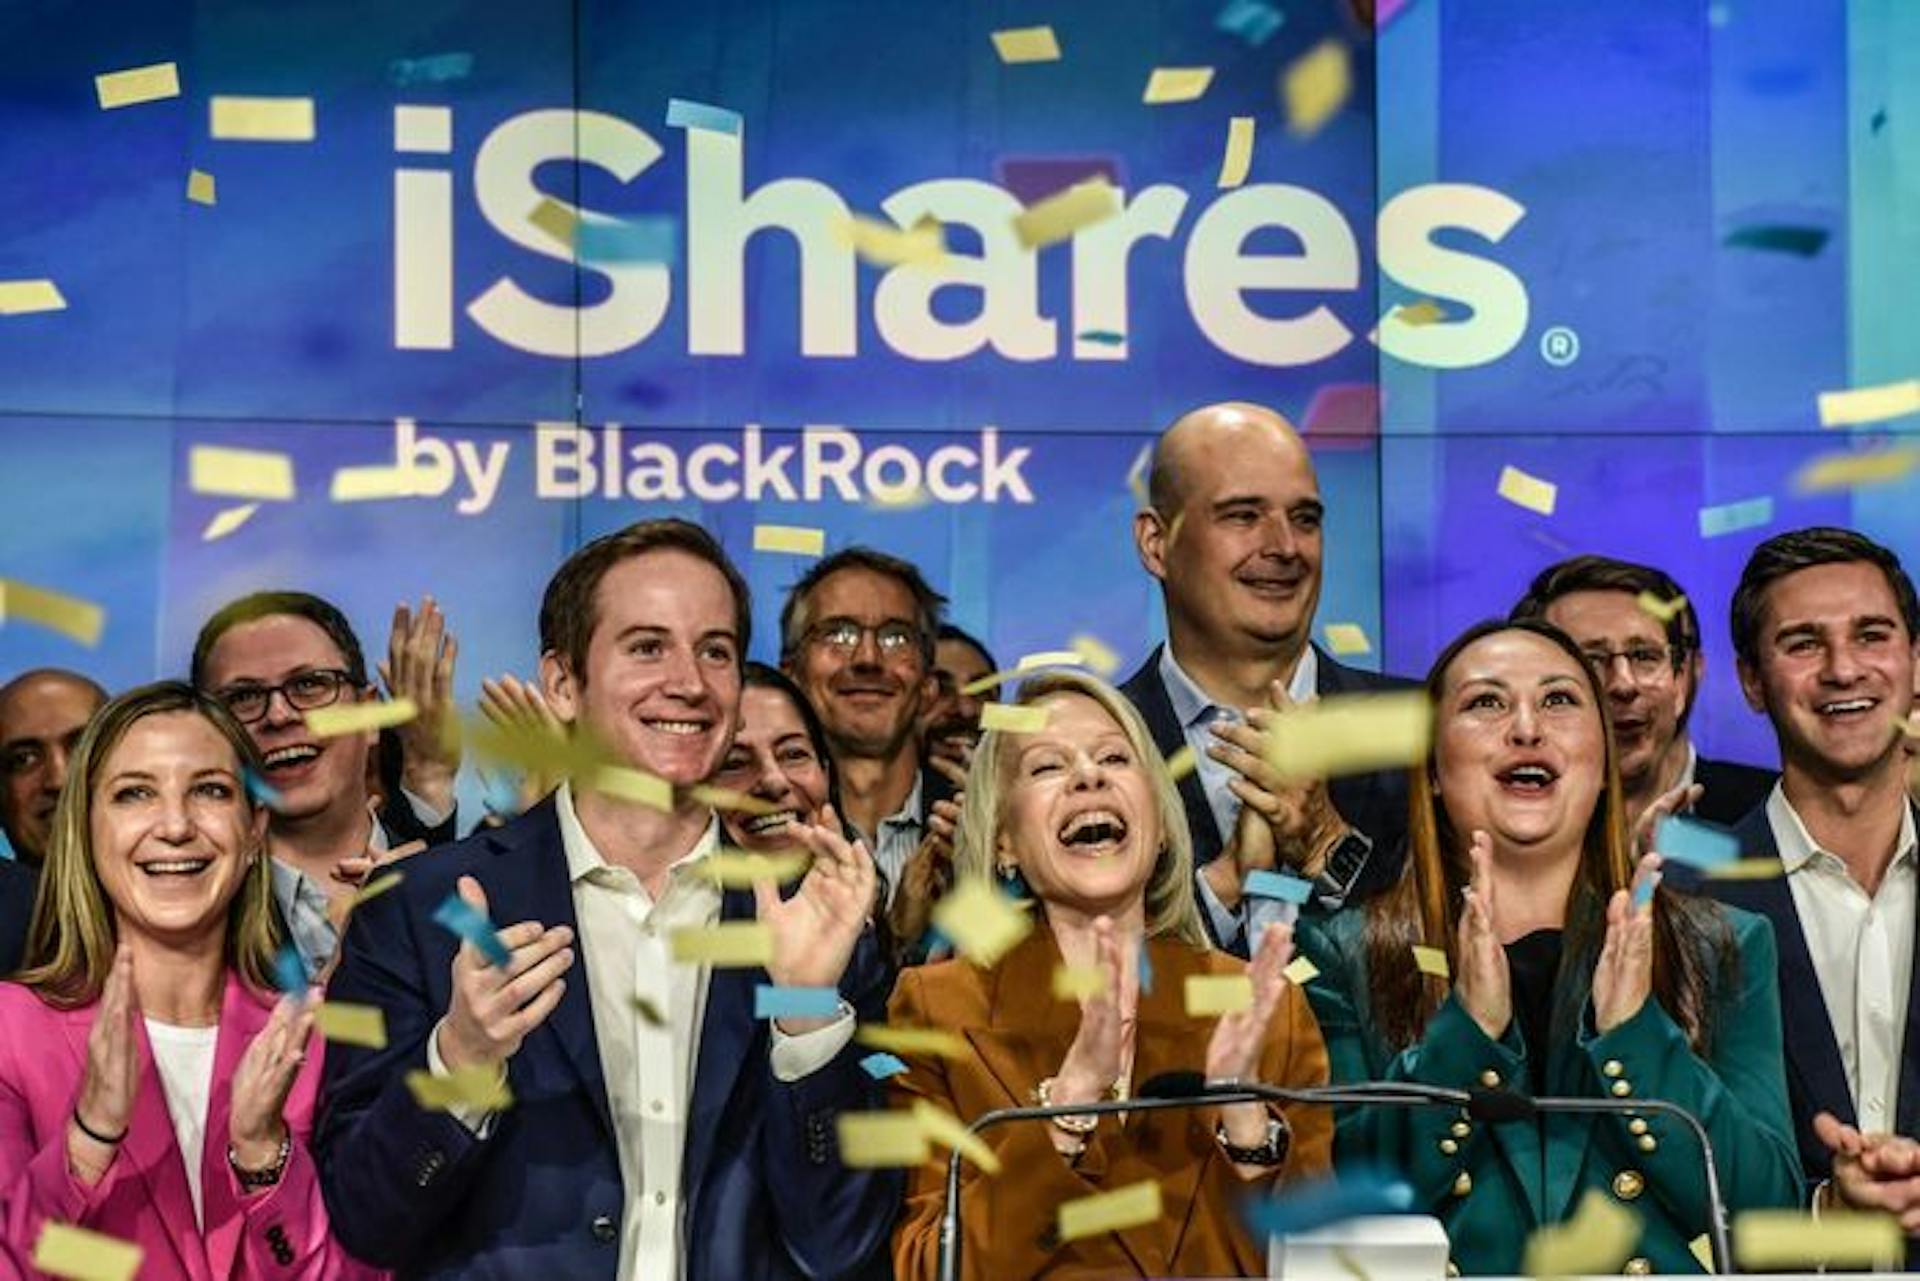 The Blackrock team rings Nasdaq's opening bell for the iShares Bitcoin Trust listing